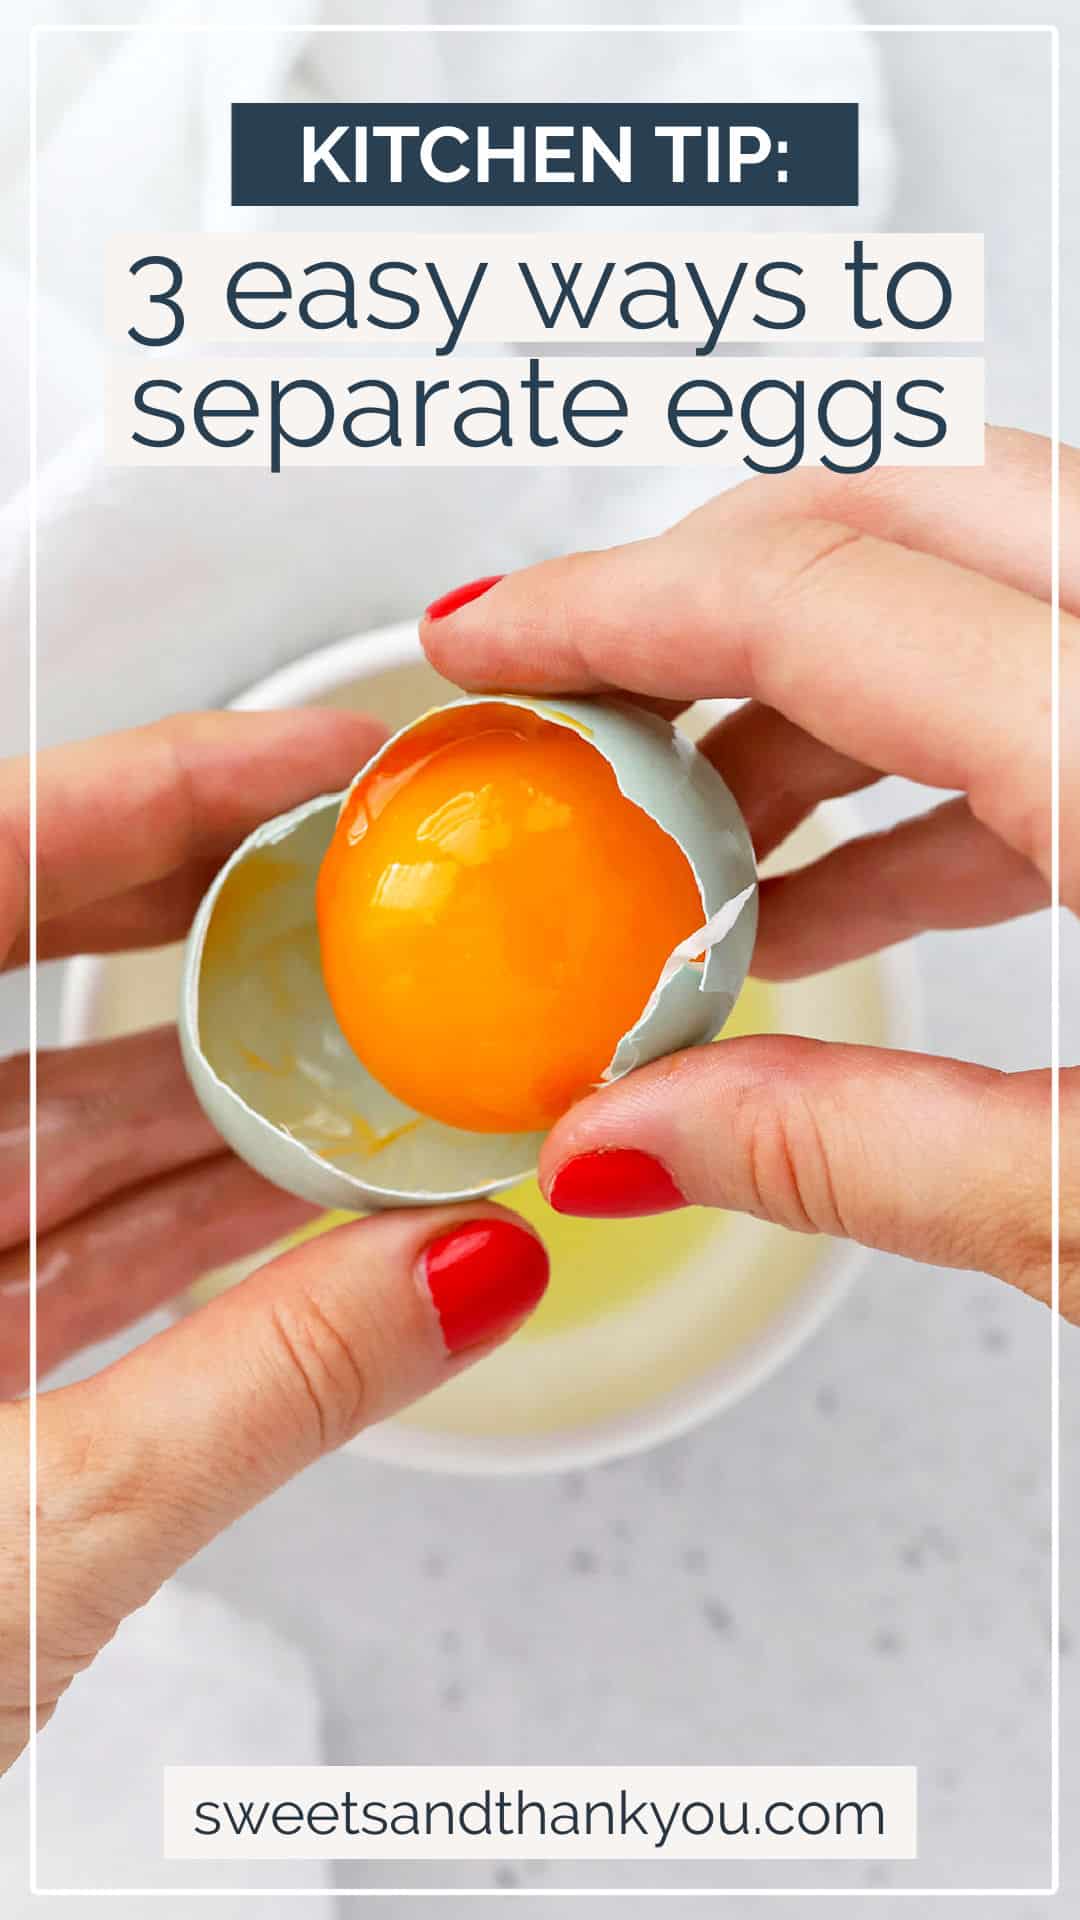 How to Separate Eggs - Learn 3 ways to separate egg whites and yolks for recipes. You’ll be ready to whip up meringues, add texture to cookies, and more! // How to separate eggs // How to separate egg yolks and whites // Baking Tips // Baking Basics // Baking Tutorial // Separating eggs / how to separate egg whites / how to separate egg yolk / how to separate an egg / how to separate eggs without a separator / how to separate eggs with your hands / how to separate eggs with the shells